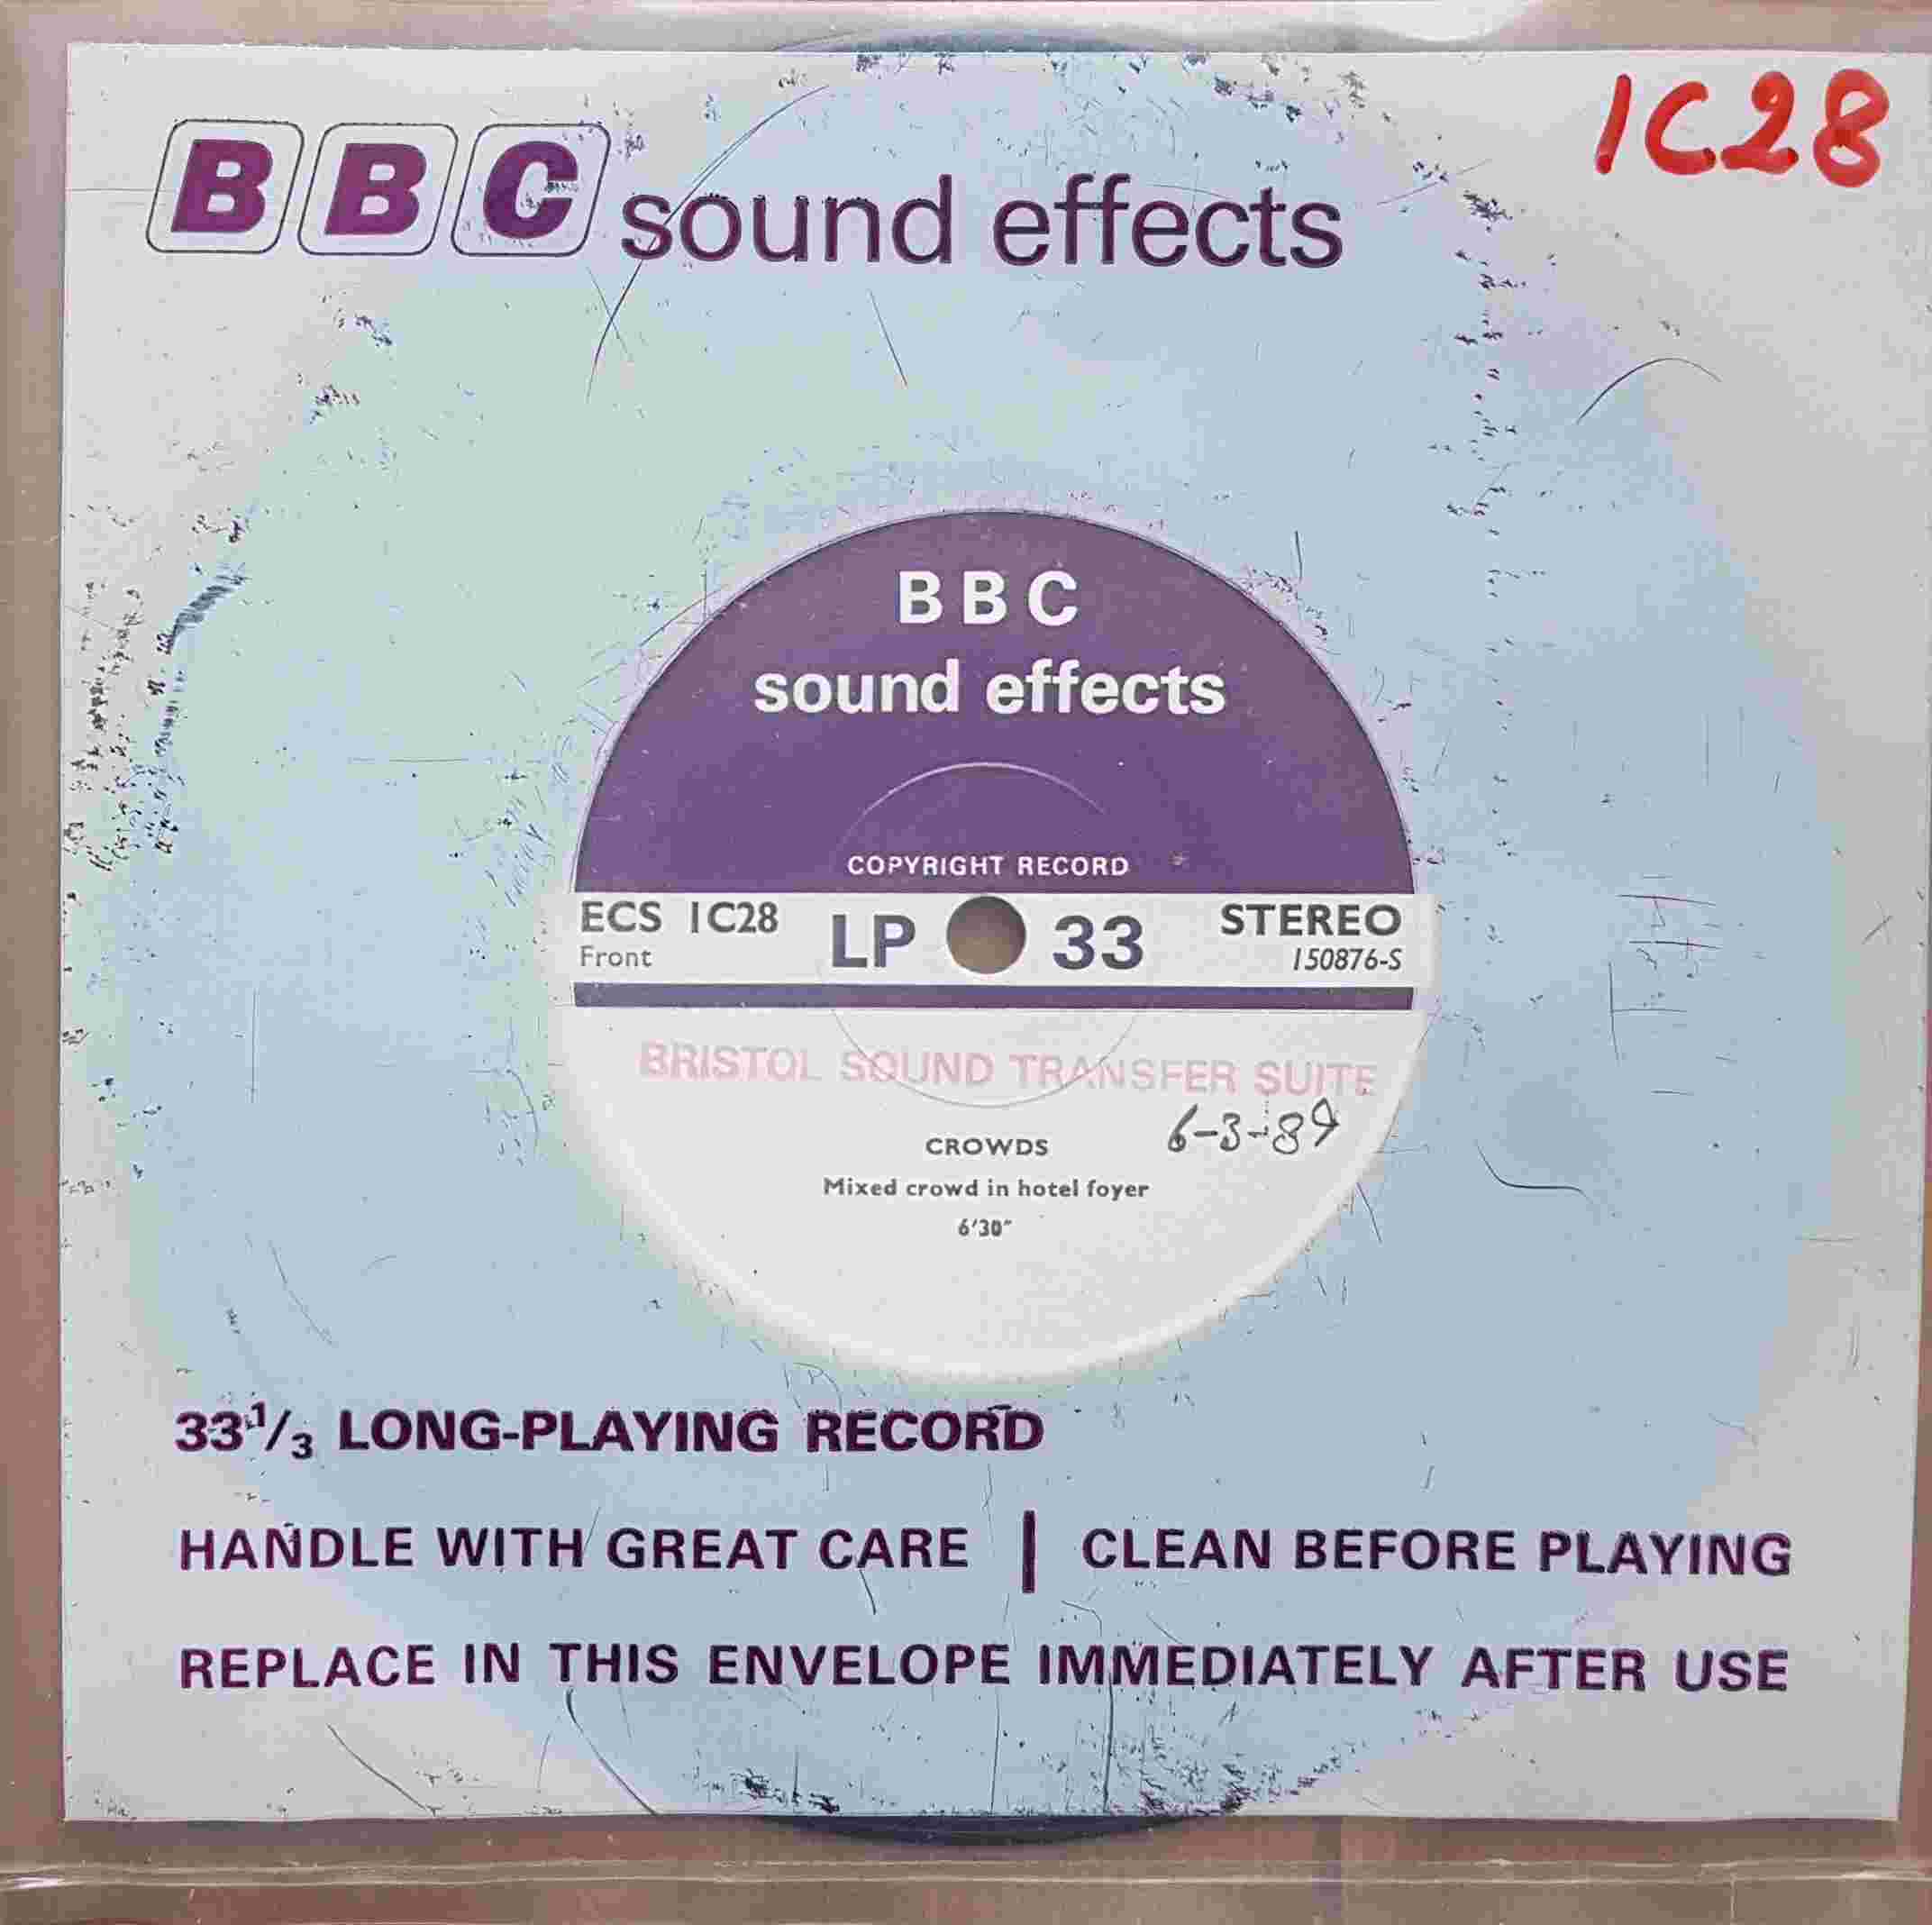 Picture of ECS 1C28 Crowds by artist Not registered from the BBC records and Tapes library